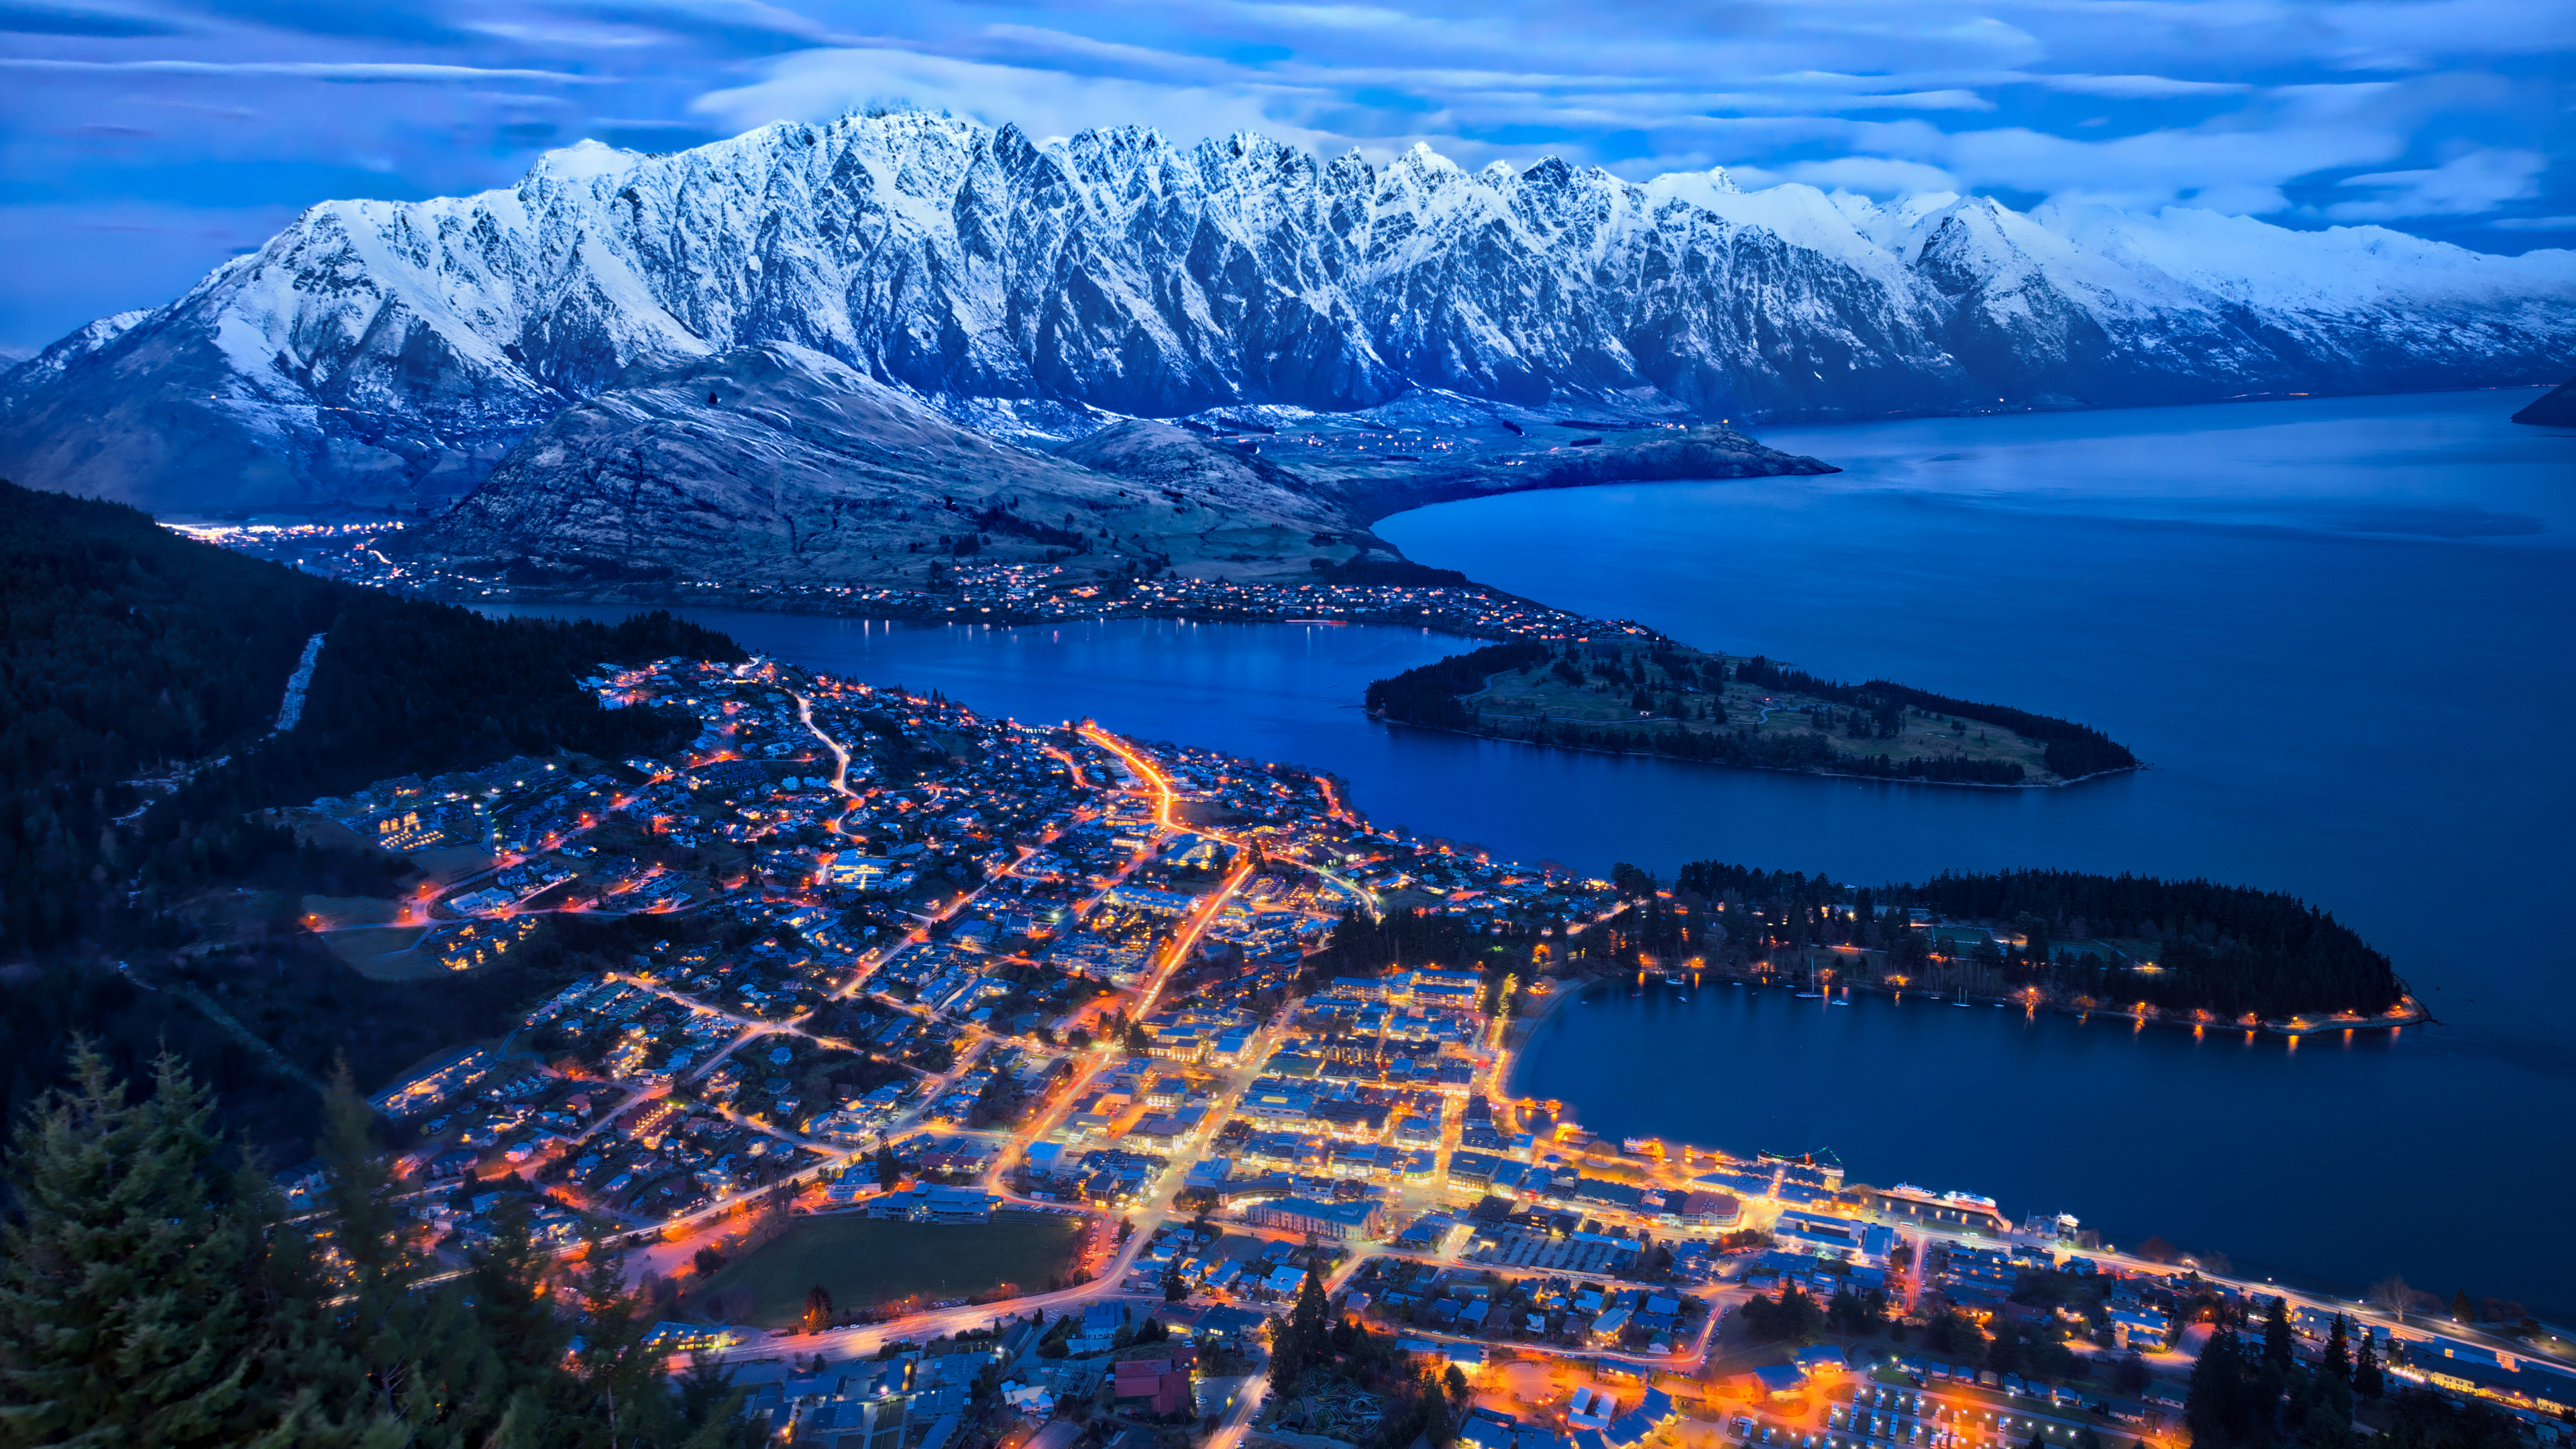 General 3840x2160 landscape 4K New Zealand cityscape mountains snow city lights night water Queenstown mountain chain aerial view peninsula downtown